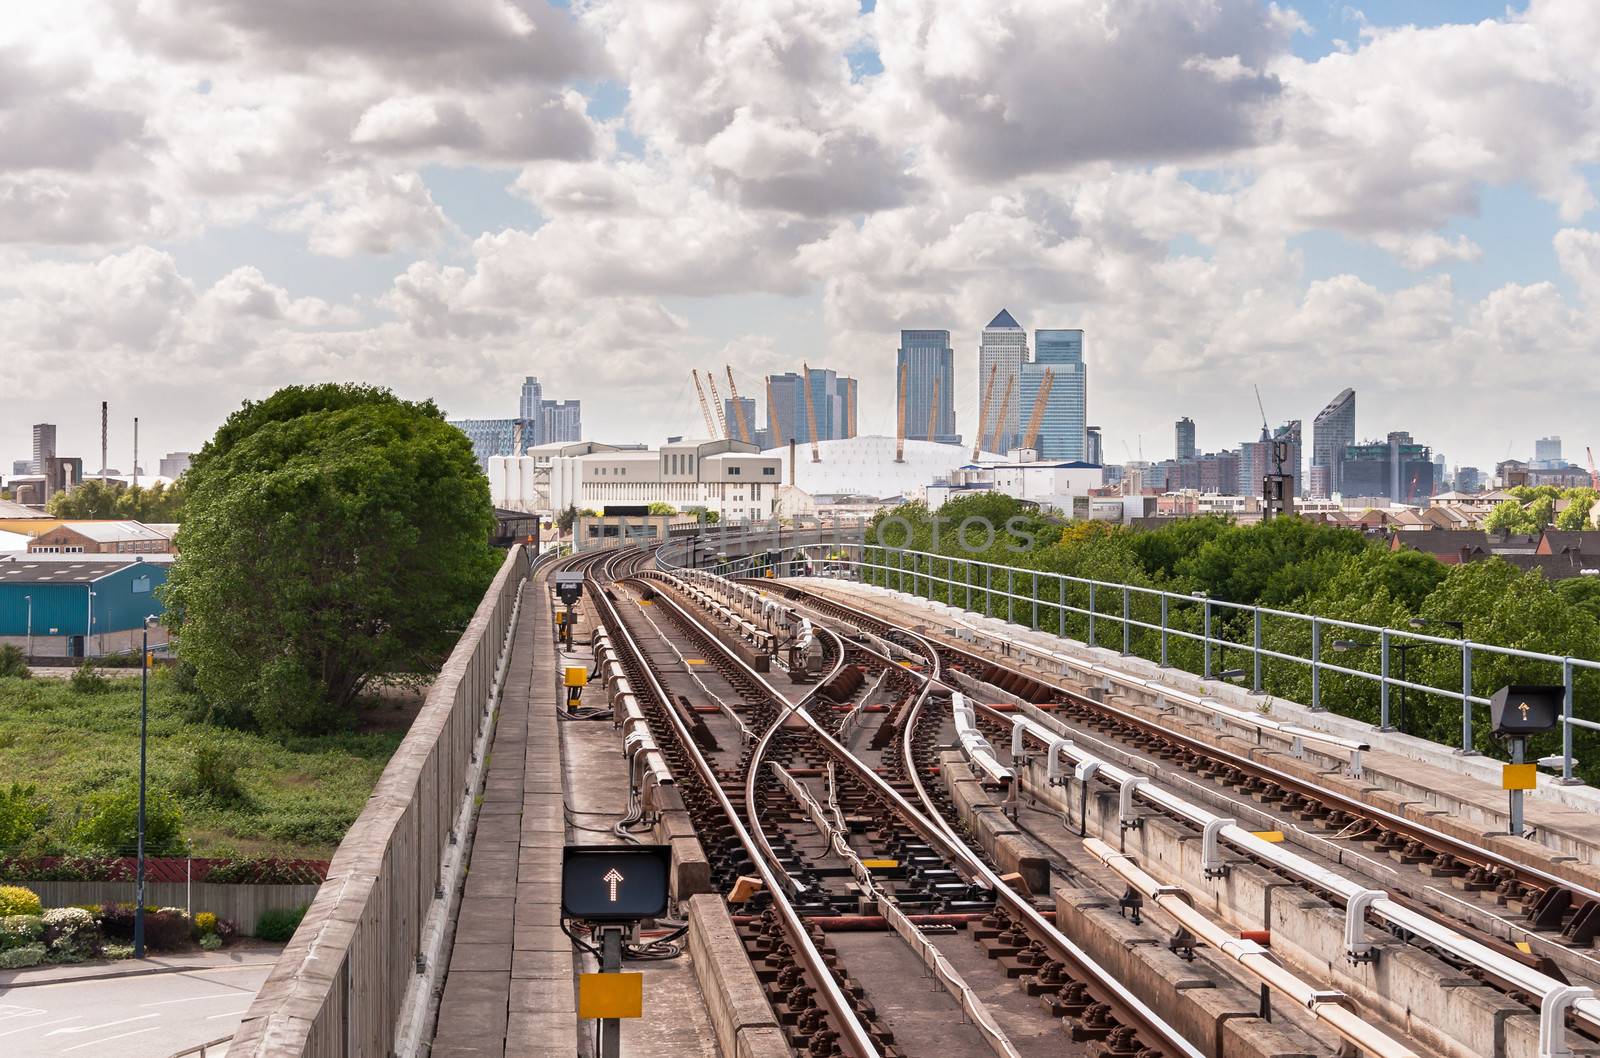 The railway tracks of Docklands Light Railway by mkos83